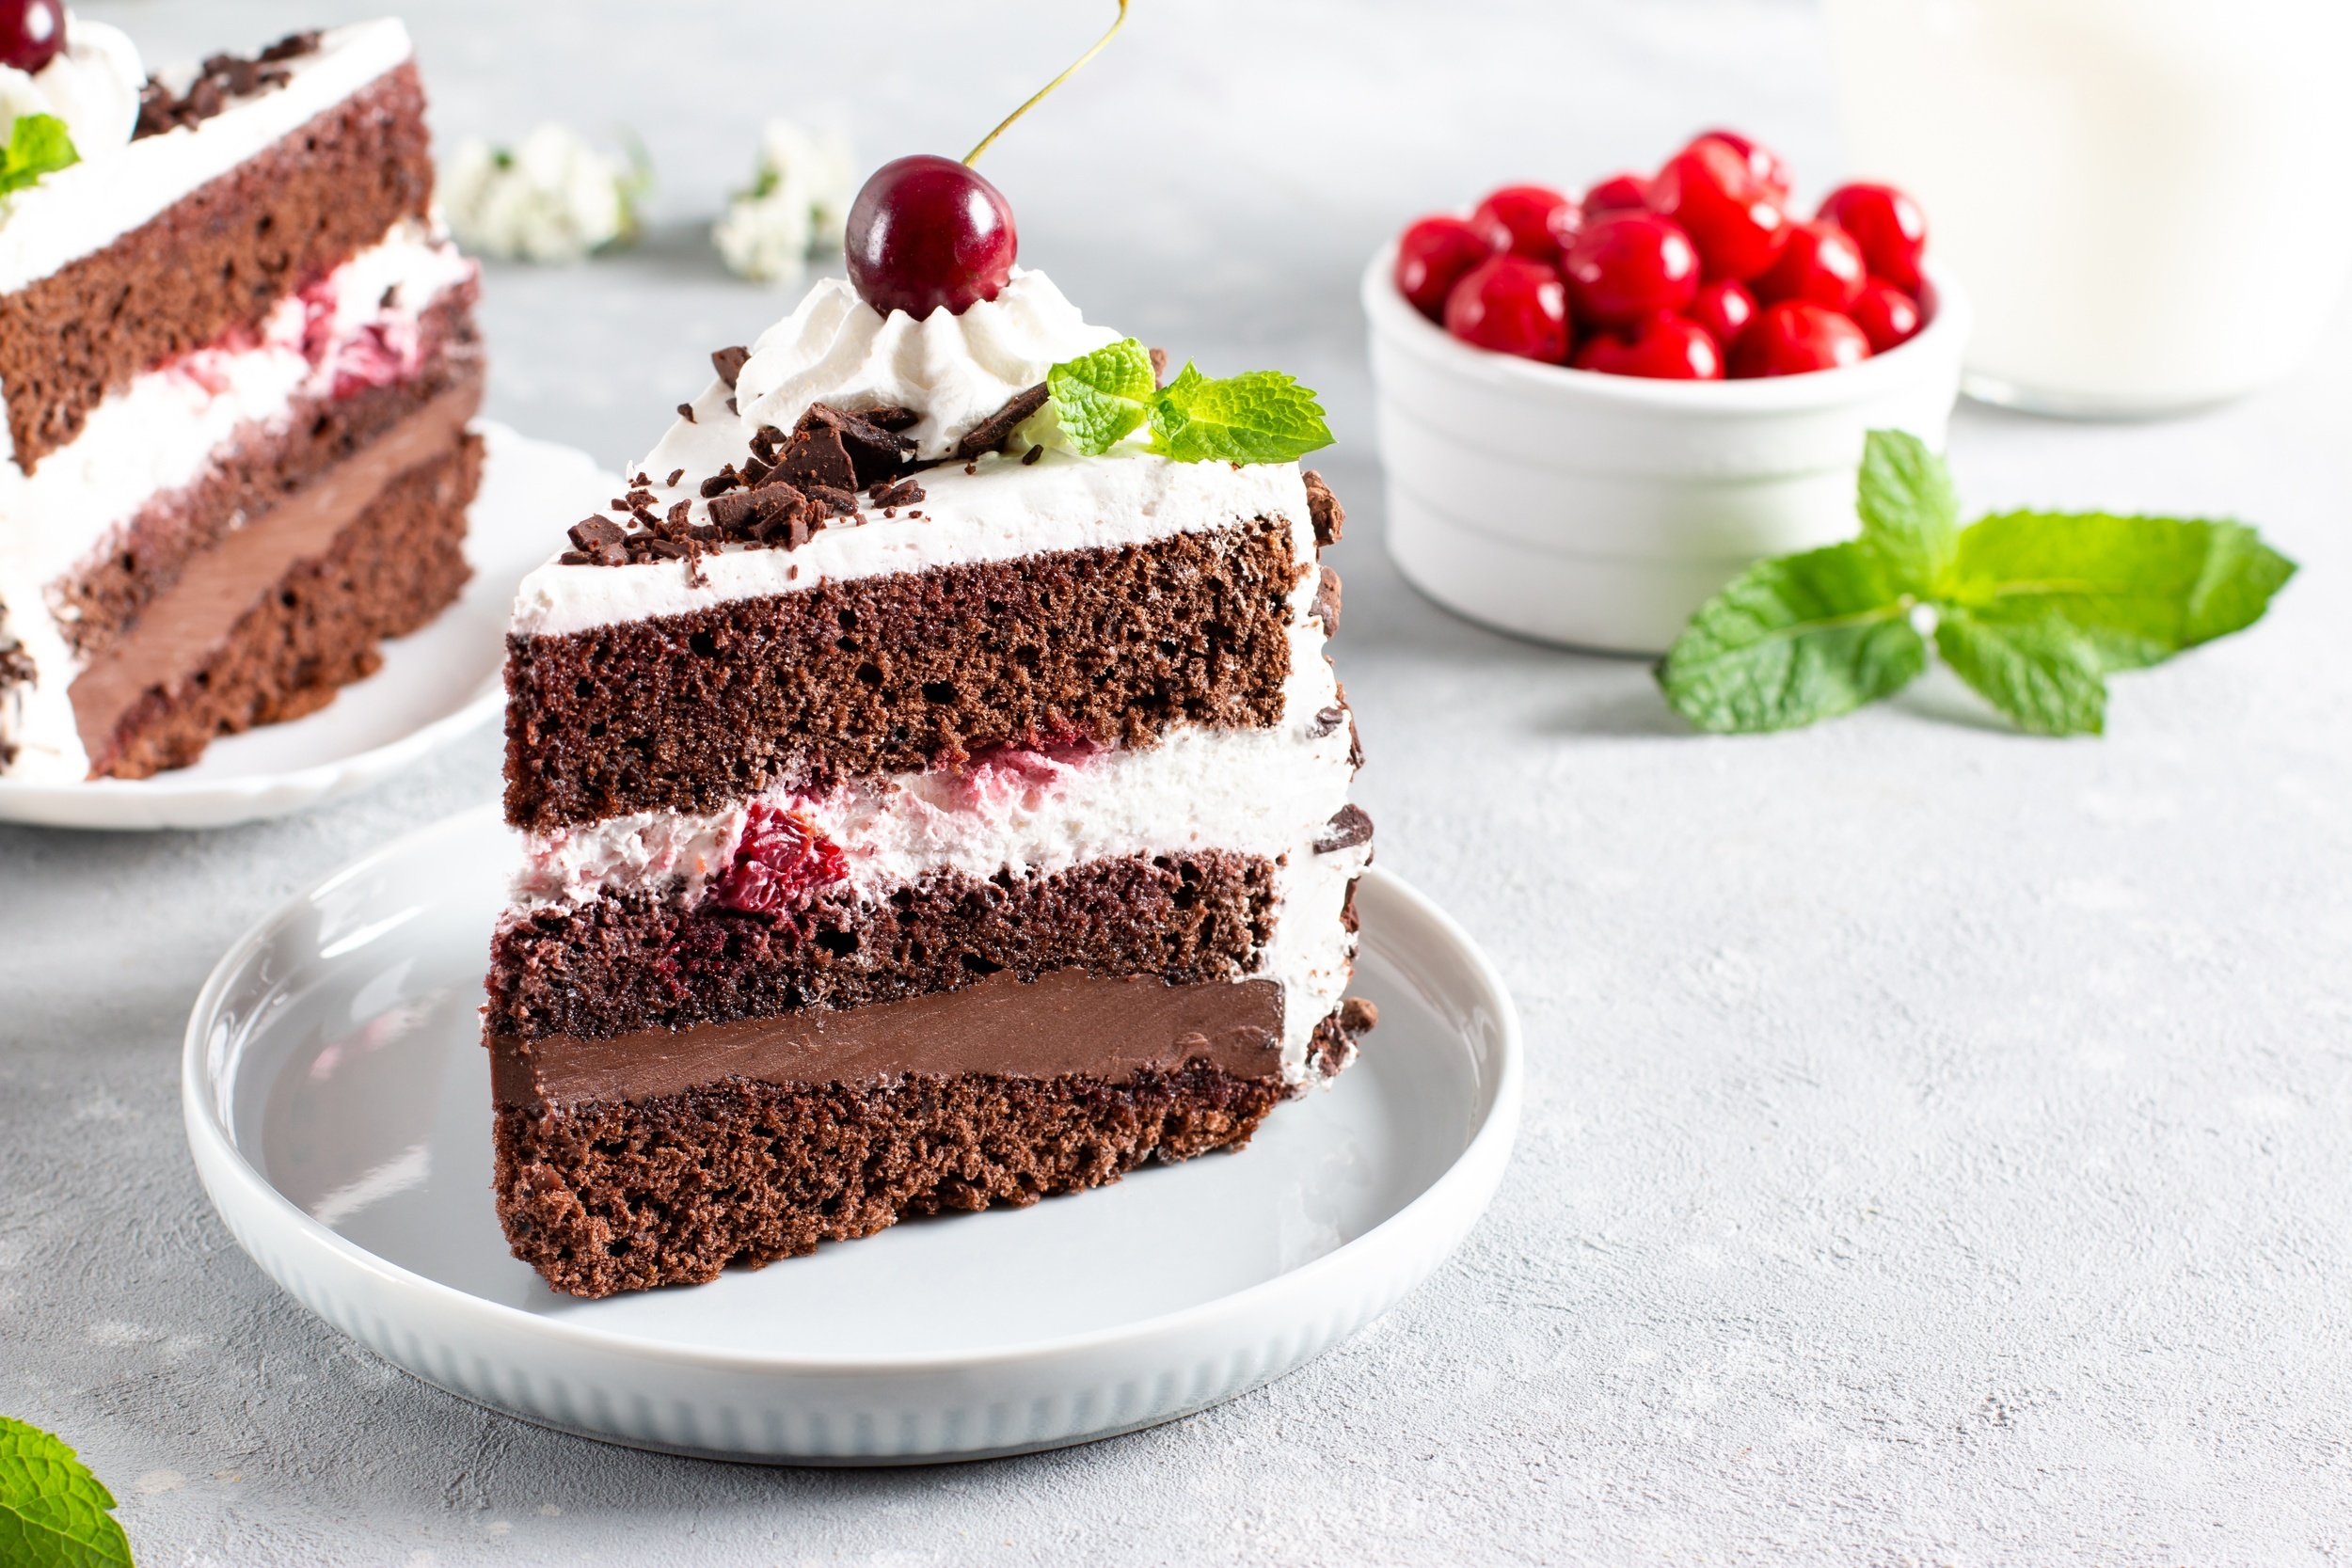 <p>Don’t worry, <em>Schwarzwälder Kirschtorte</em> has a much simpler name: Black Forest cake. Although there is, in fact, a Black Forest in Germany, that’s not where the name comes from. Instead, the dessert is named after a type of liquor called Schwarzwälder Kirsch, which is made from cherries and is an important ingredient in the torte. In keeping with tradition, you’ll need some kirsch for <a href="https://www.alsothecrumbsplease.com/authentic-black-forest-cake/"><span>this recipe from Also The Crumbs Please</span></a>.</p><p><a href='https://www.msn.com/en-us/community/channel/vid-cj9pqbr0vn9in2b6ddcd8sfgpfq6x6utp44fssrv6mc2gtybw0us'>Follow us on MSN to see more of our exclusive lifestyle content.</a></p>